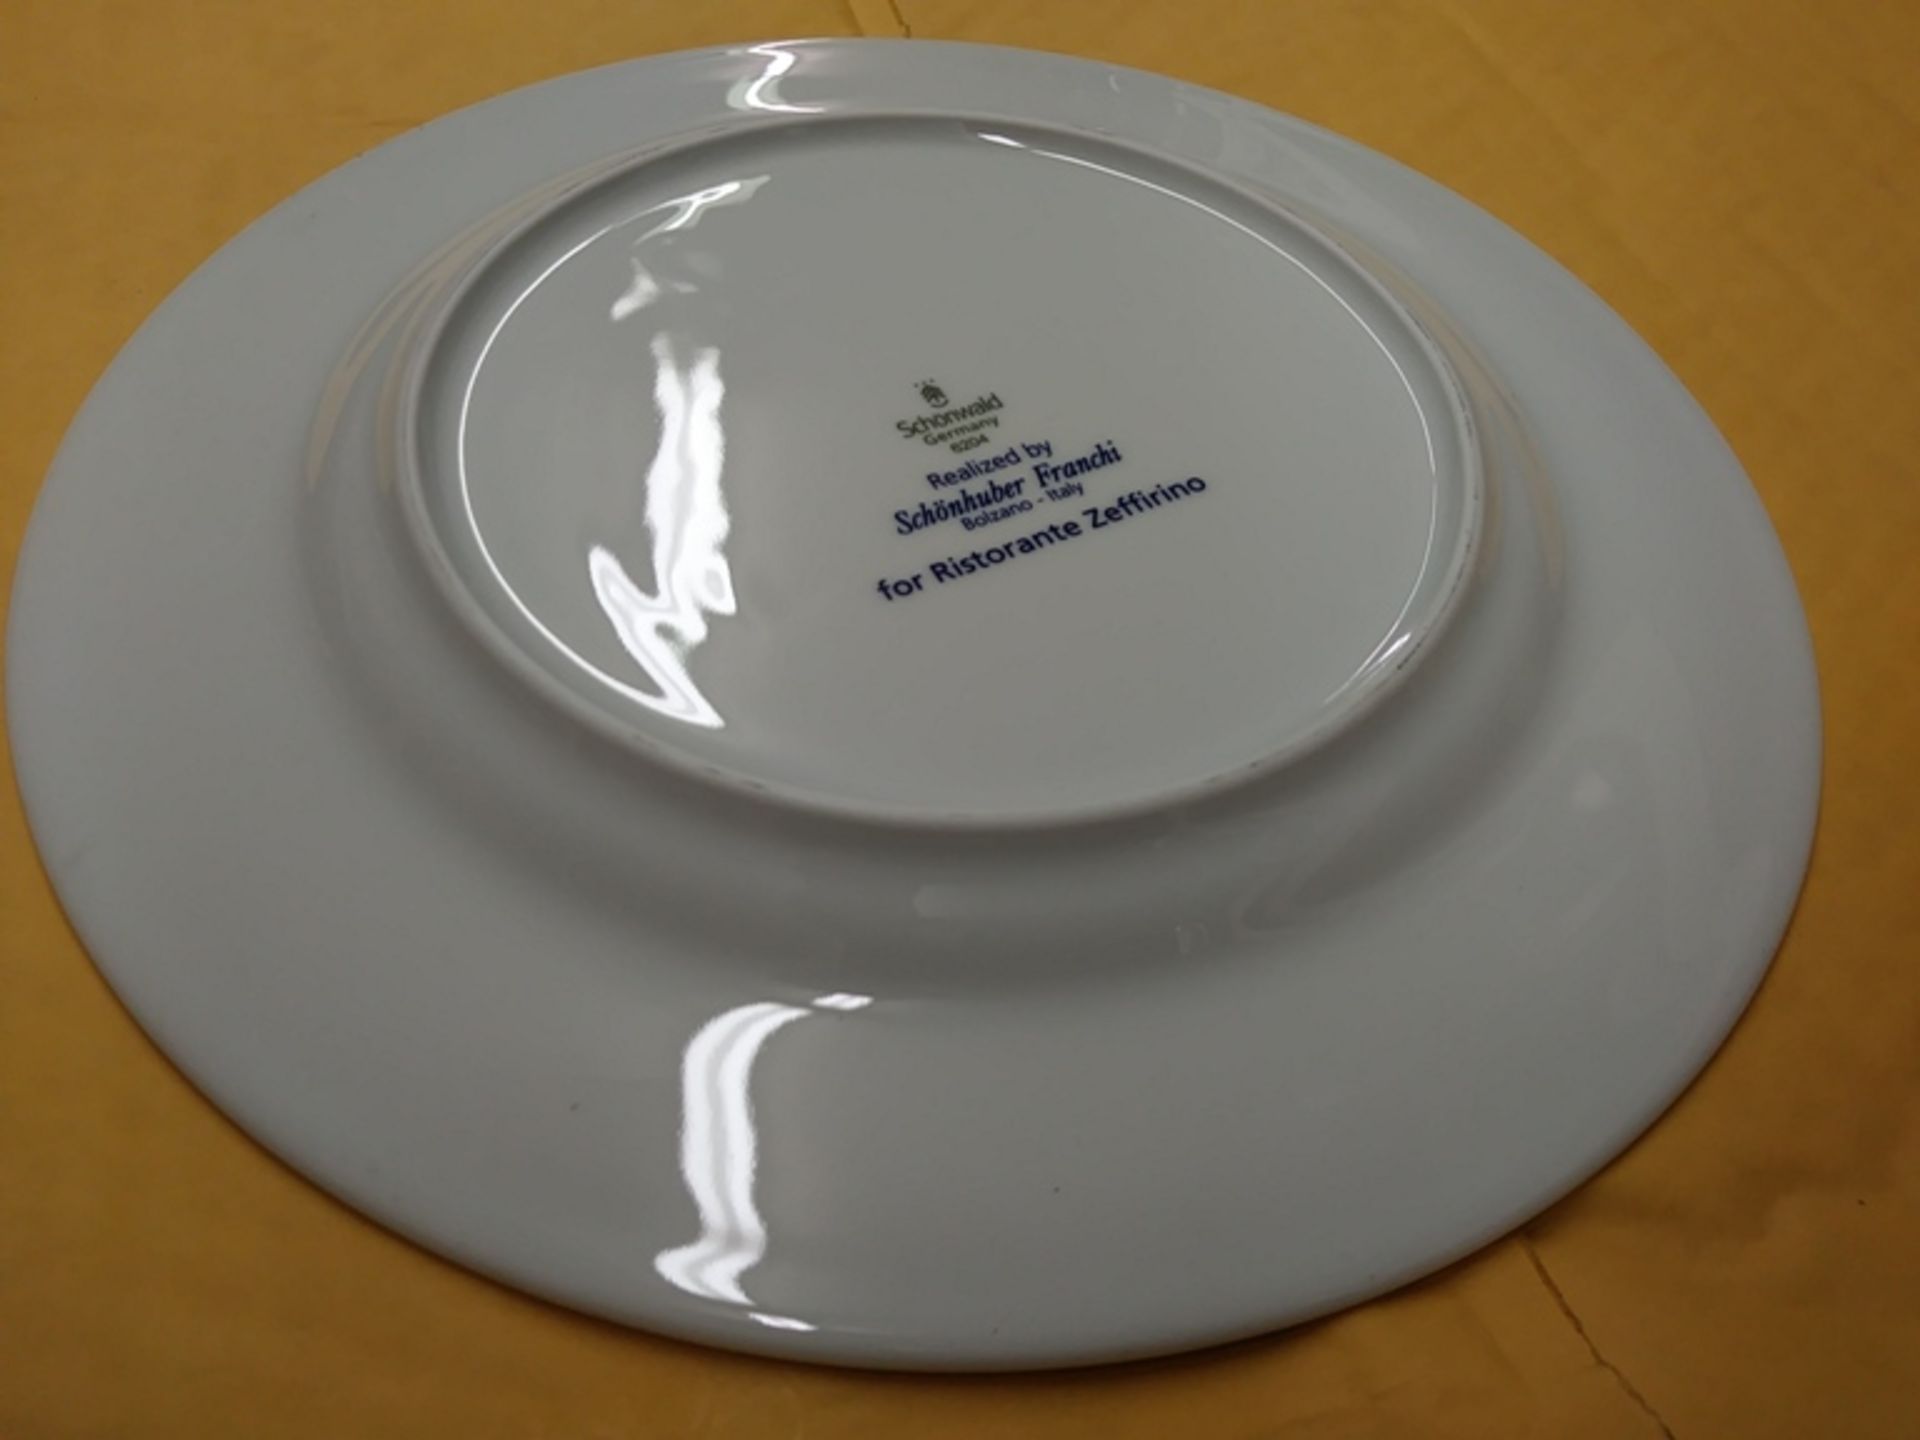 NEW 12" SCHONWALD PLATE (INCLUDES QTY: 96) - Image 2 of 3